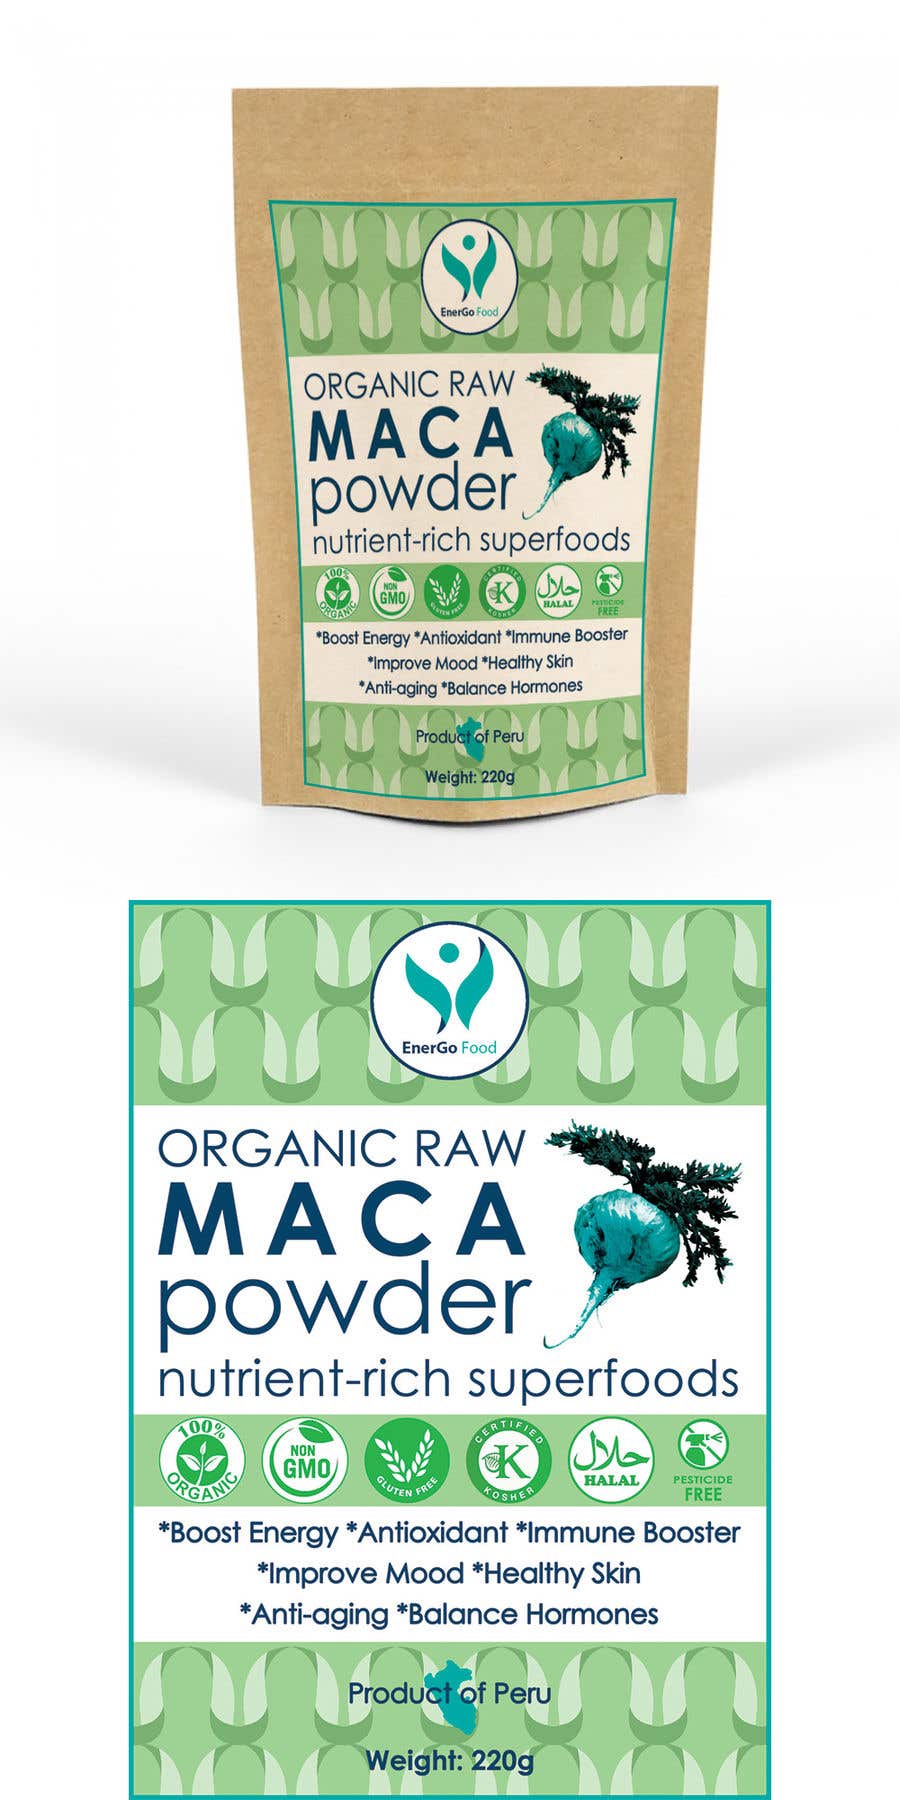 Wettbewerbs Eintrag #8 für                                                 Design Product Packaging label for Bags with Superfood products in Photoshop
                                            